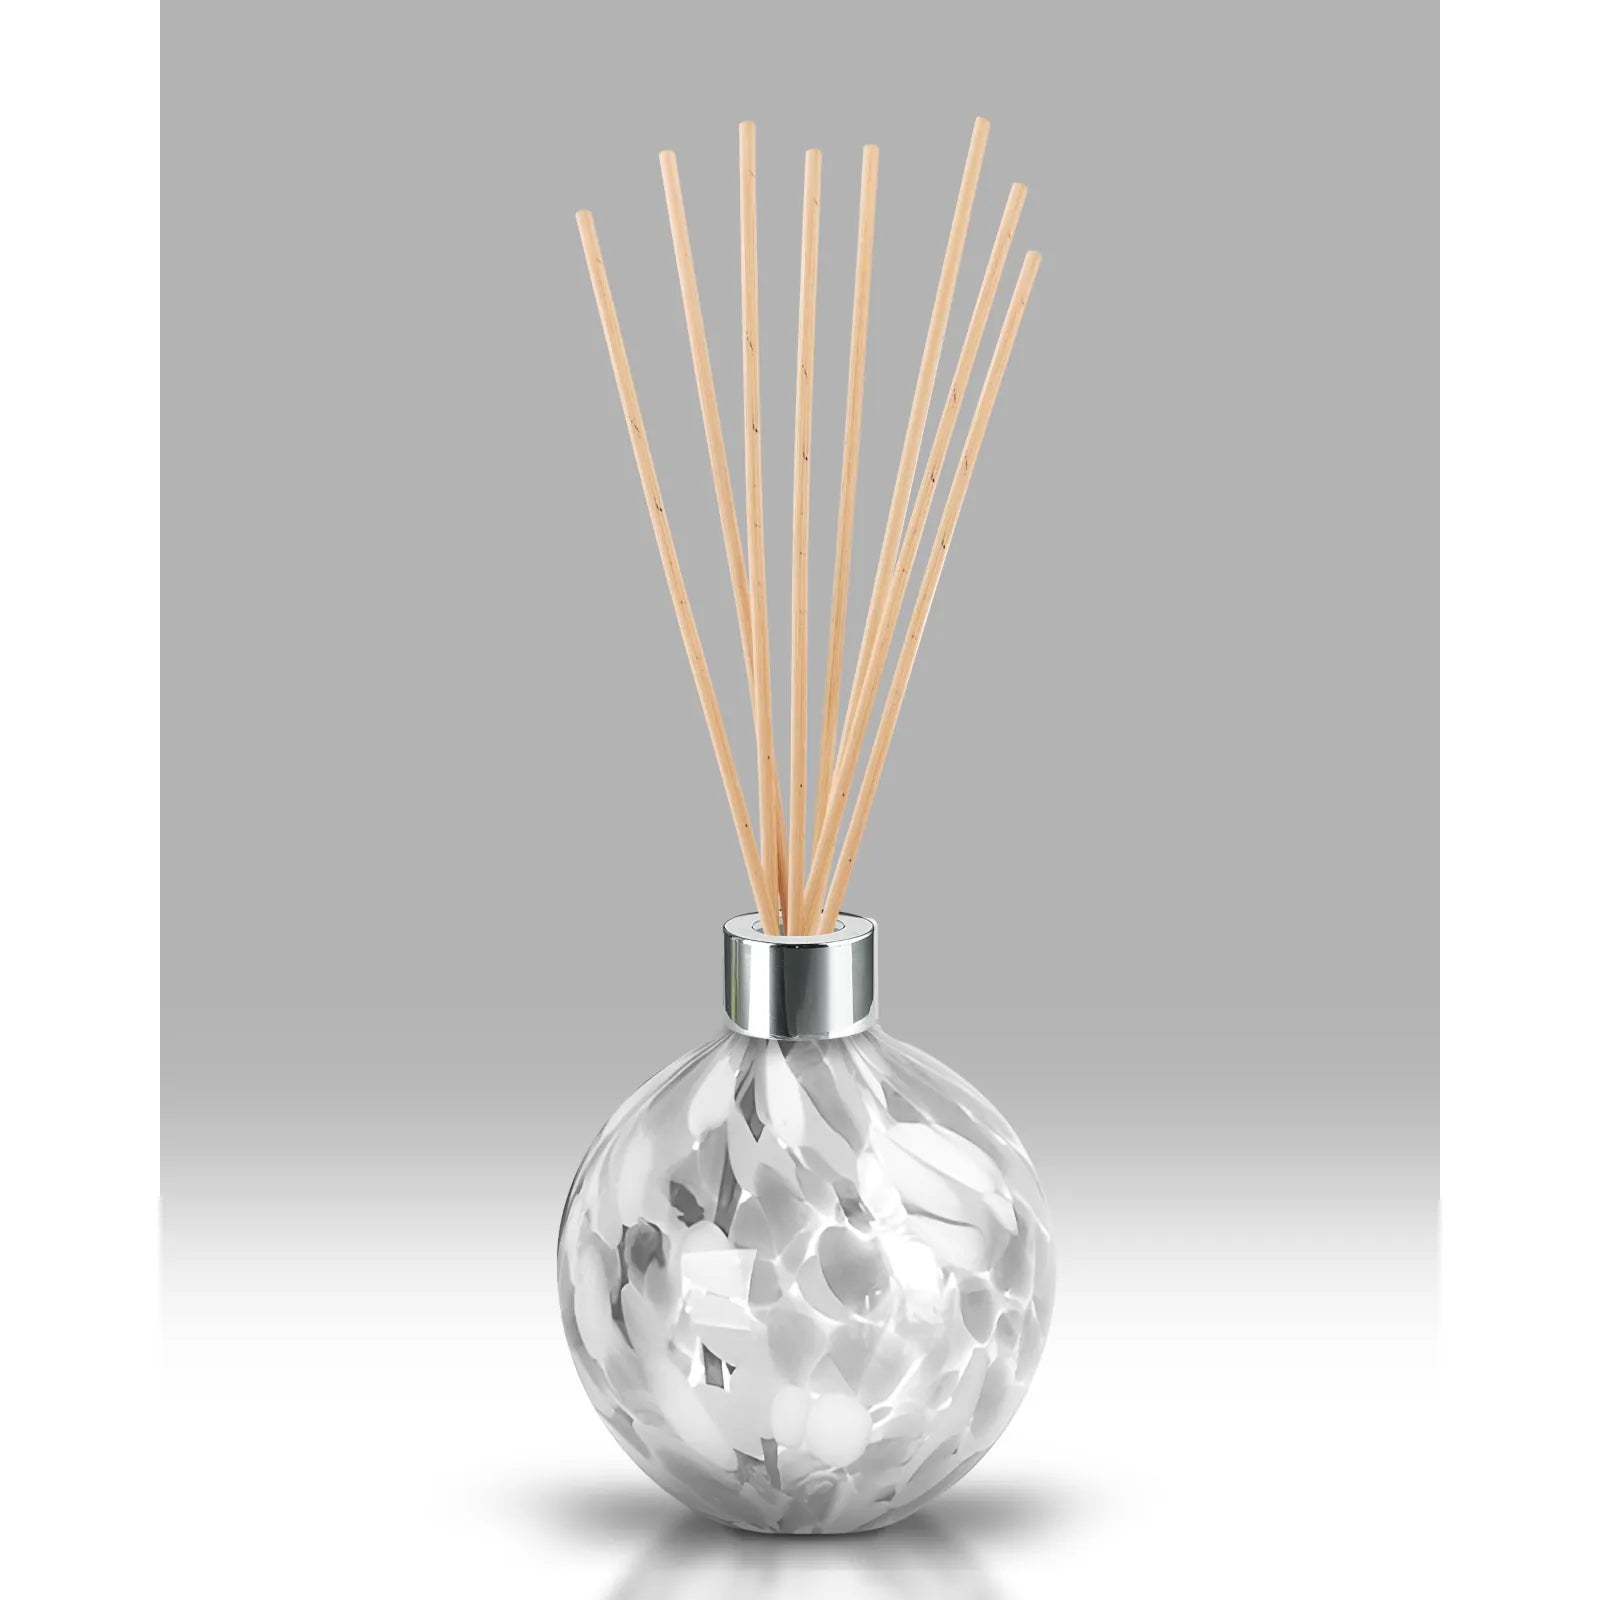 Exquisite Silver And White Glass Diffuser